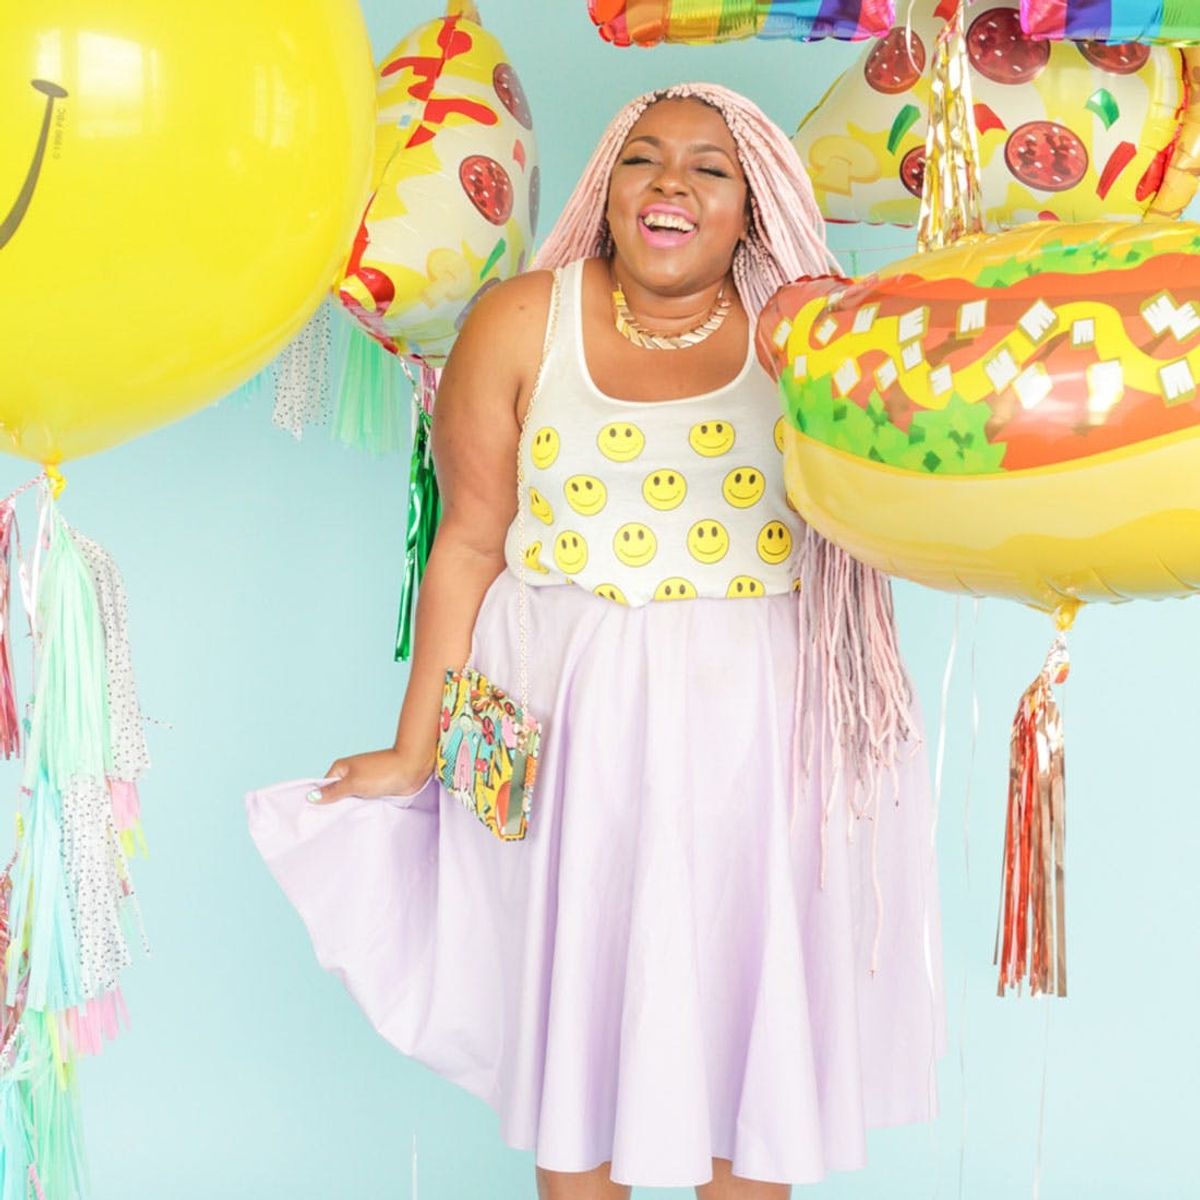 This ModCloth Lookbook Is the Epitome of Summer Fun